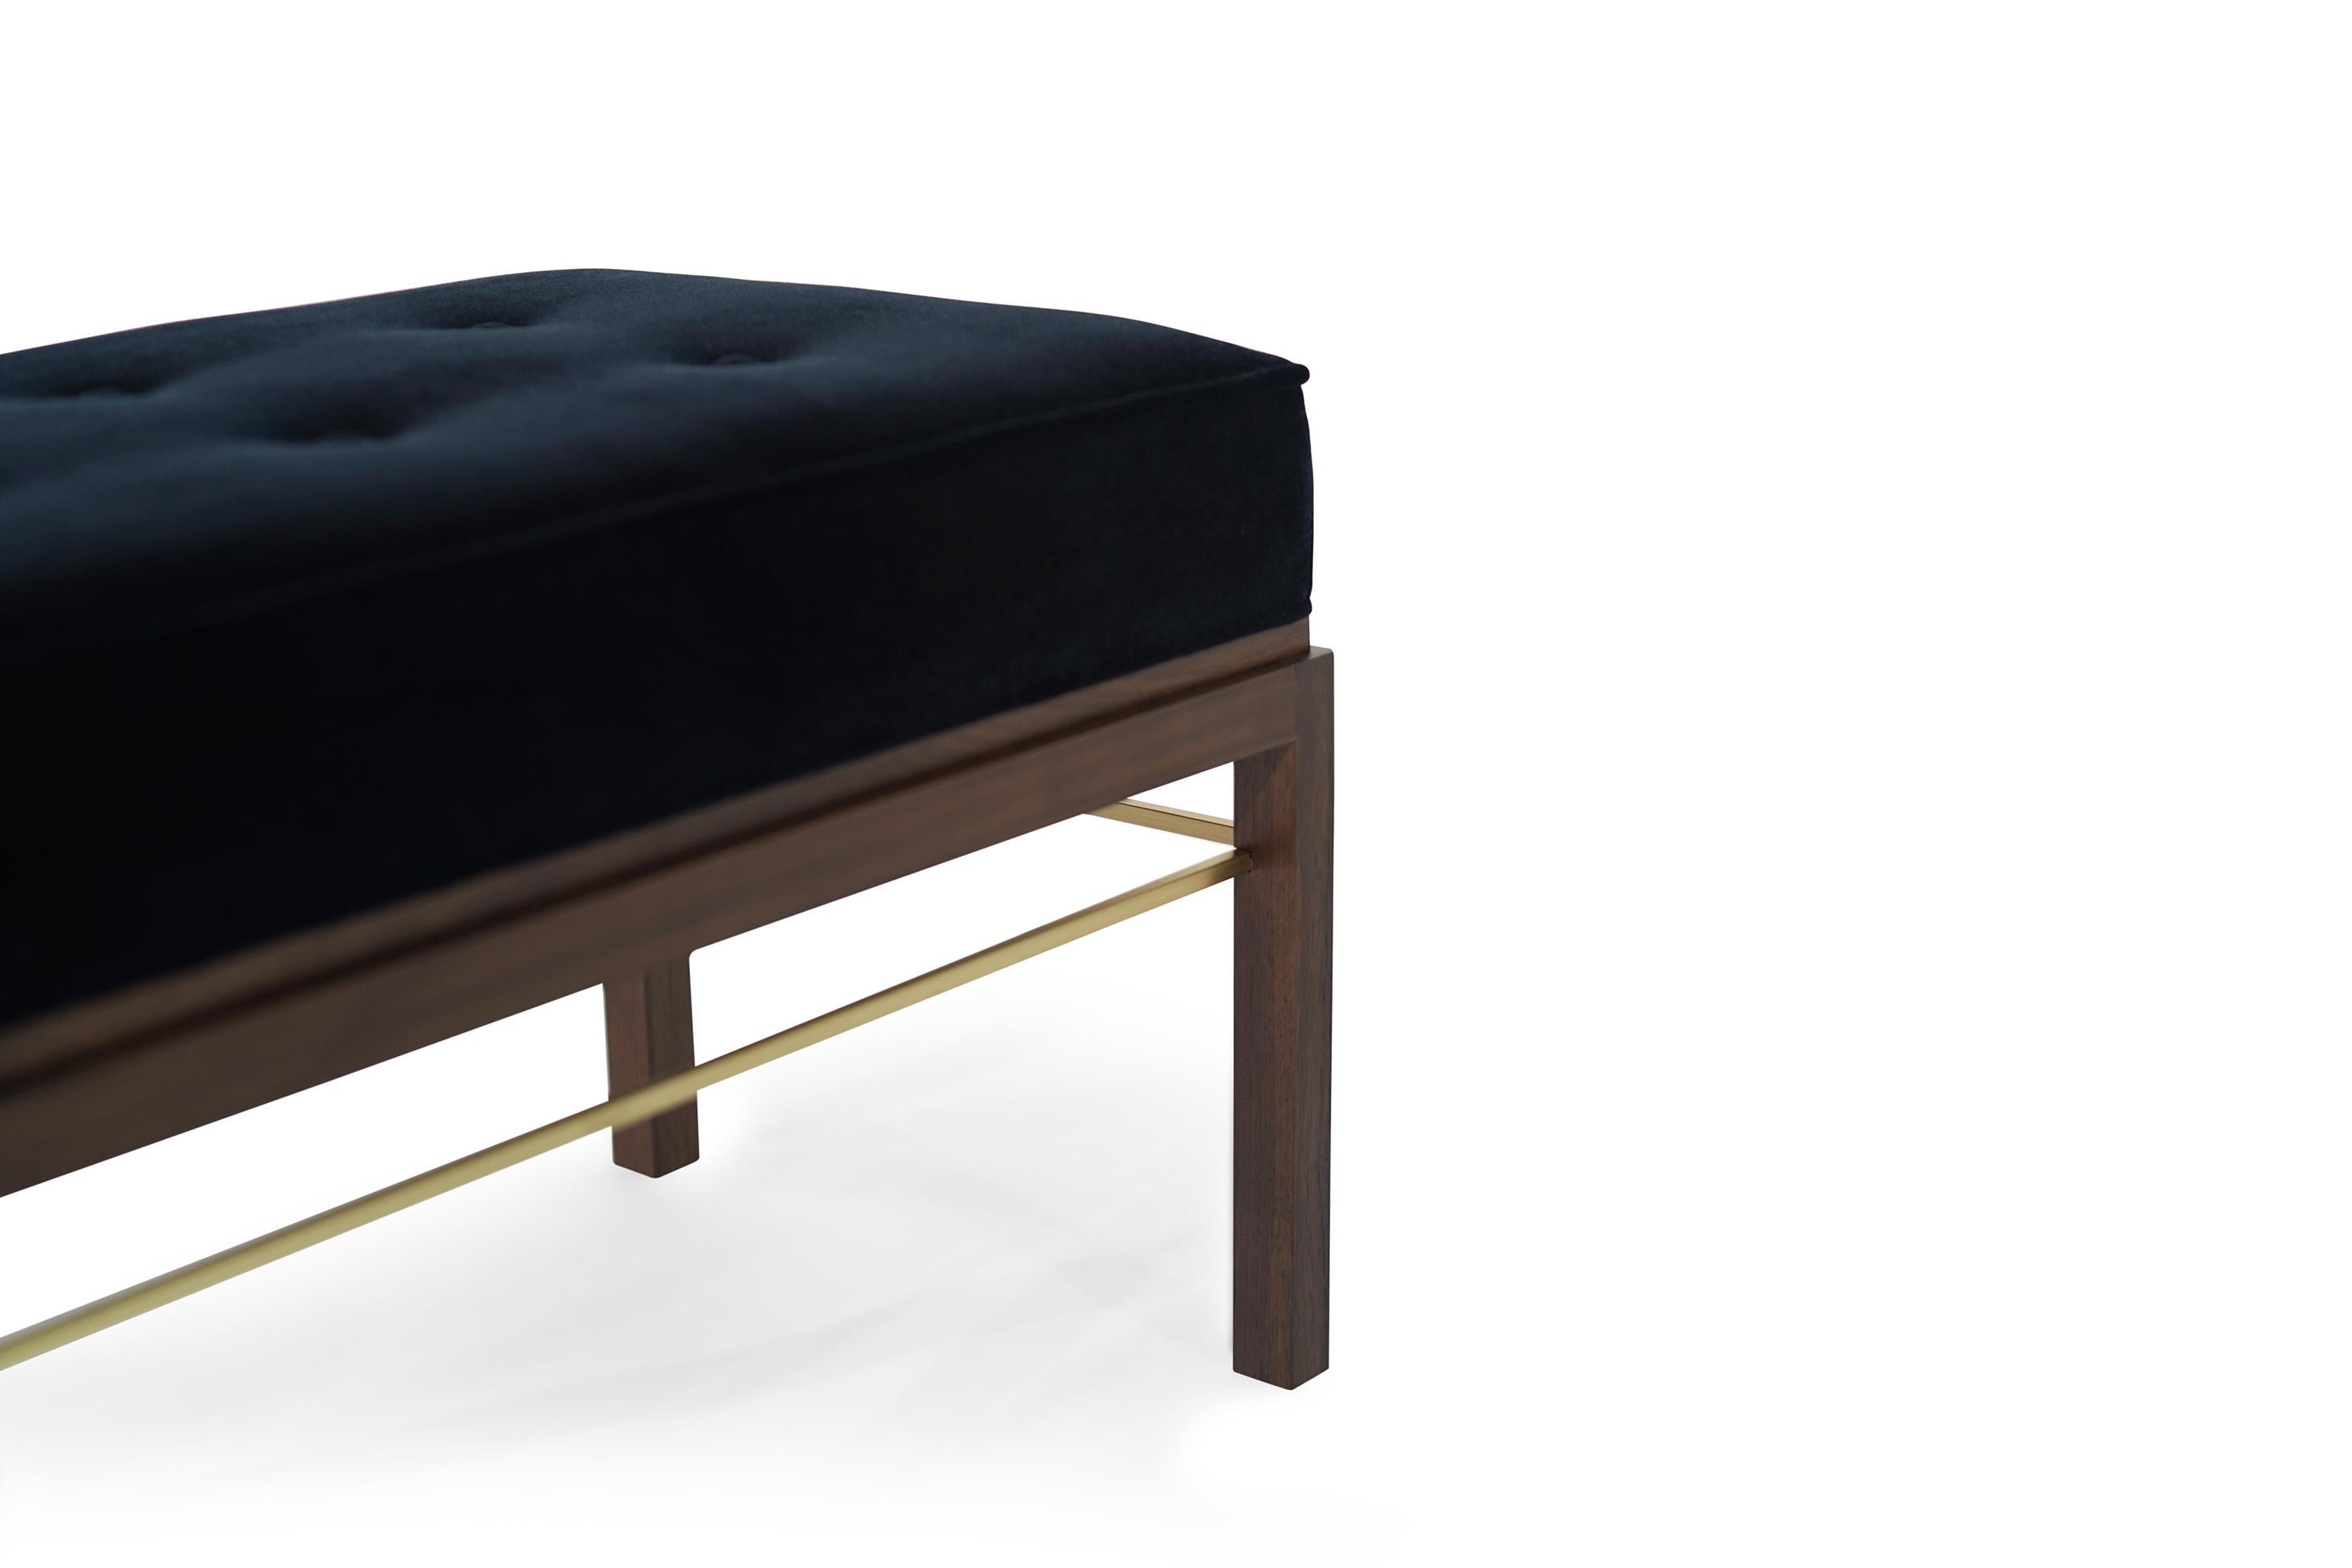 Mid-Century Modern Brass-Accented Edward Wormley for Dunbar Bench in Mohair, 1950s